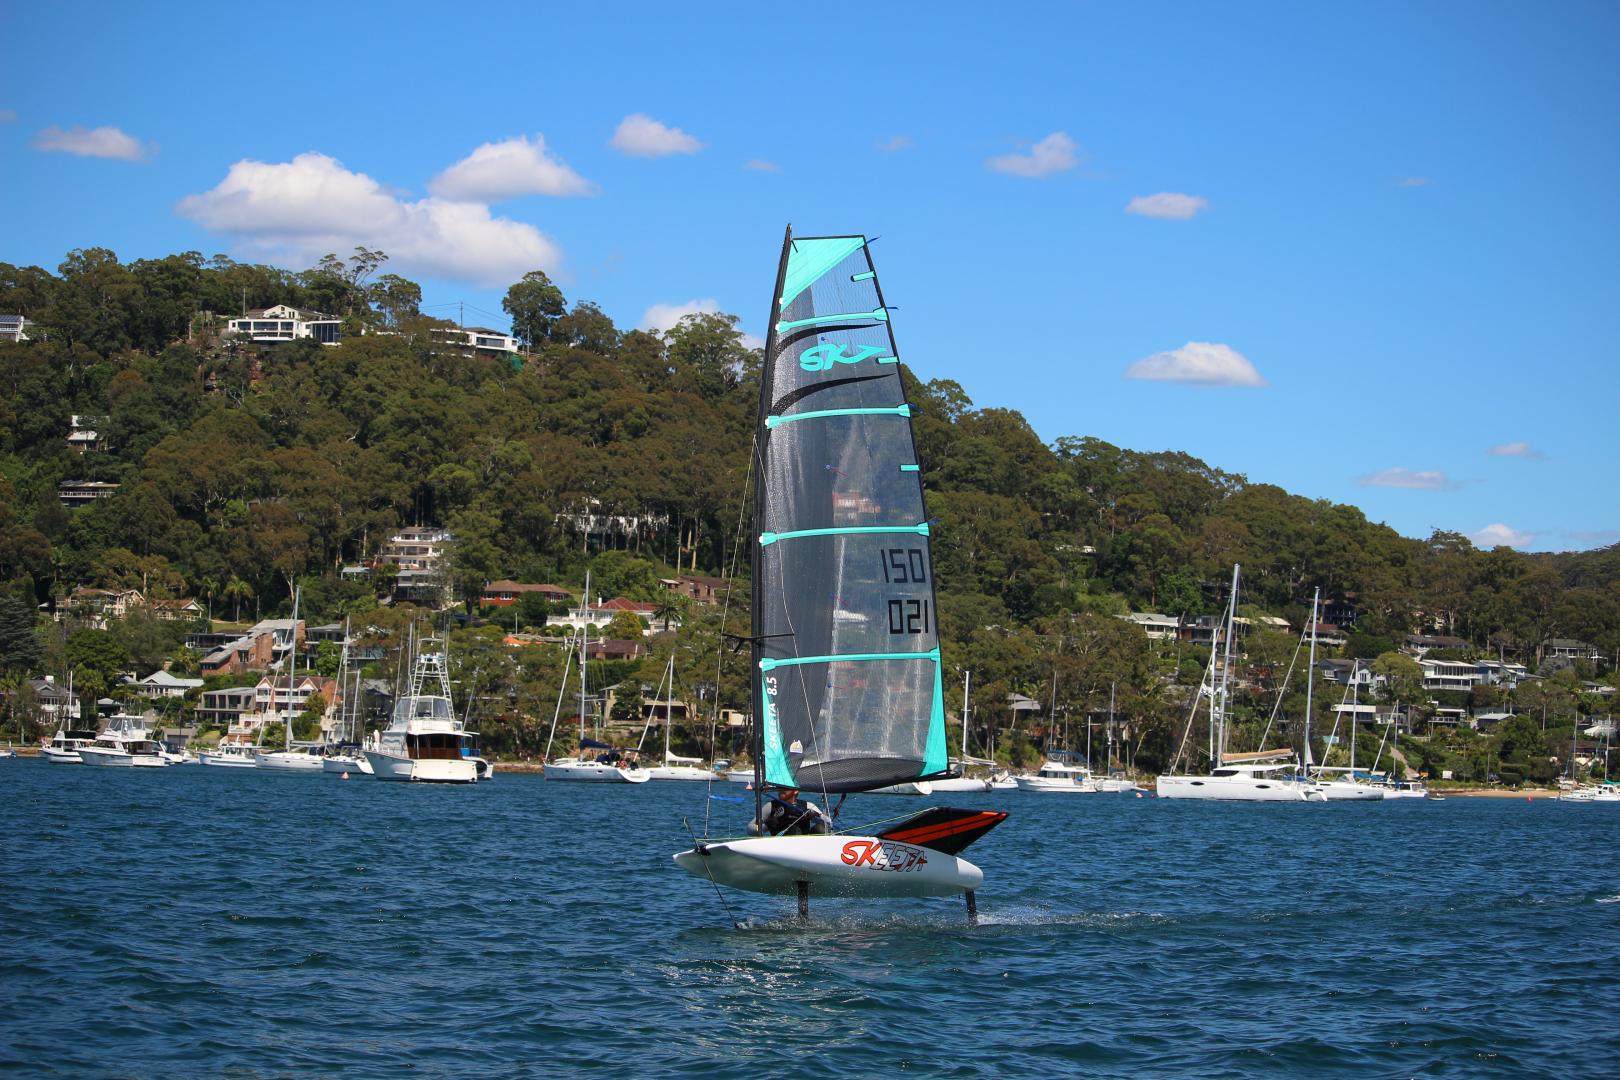 With Cobra’s efficient production, the Skeeta is also a lot more affordable than most other foiling dinghies